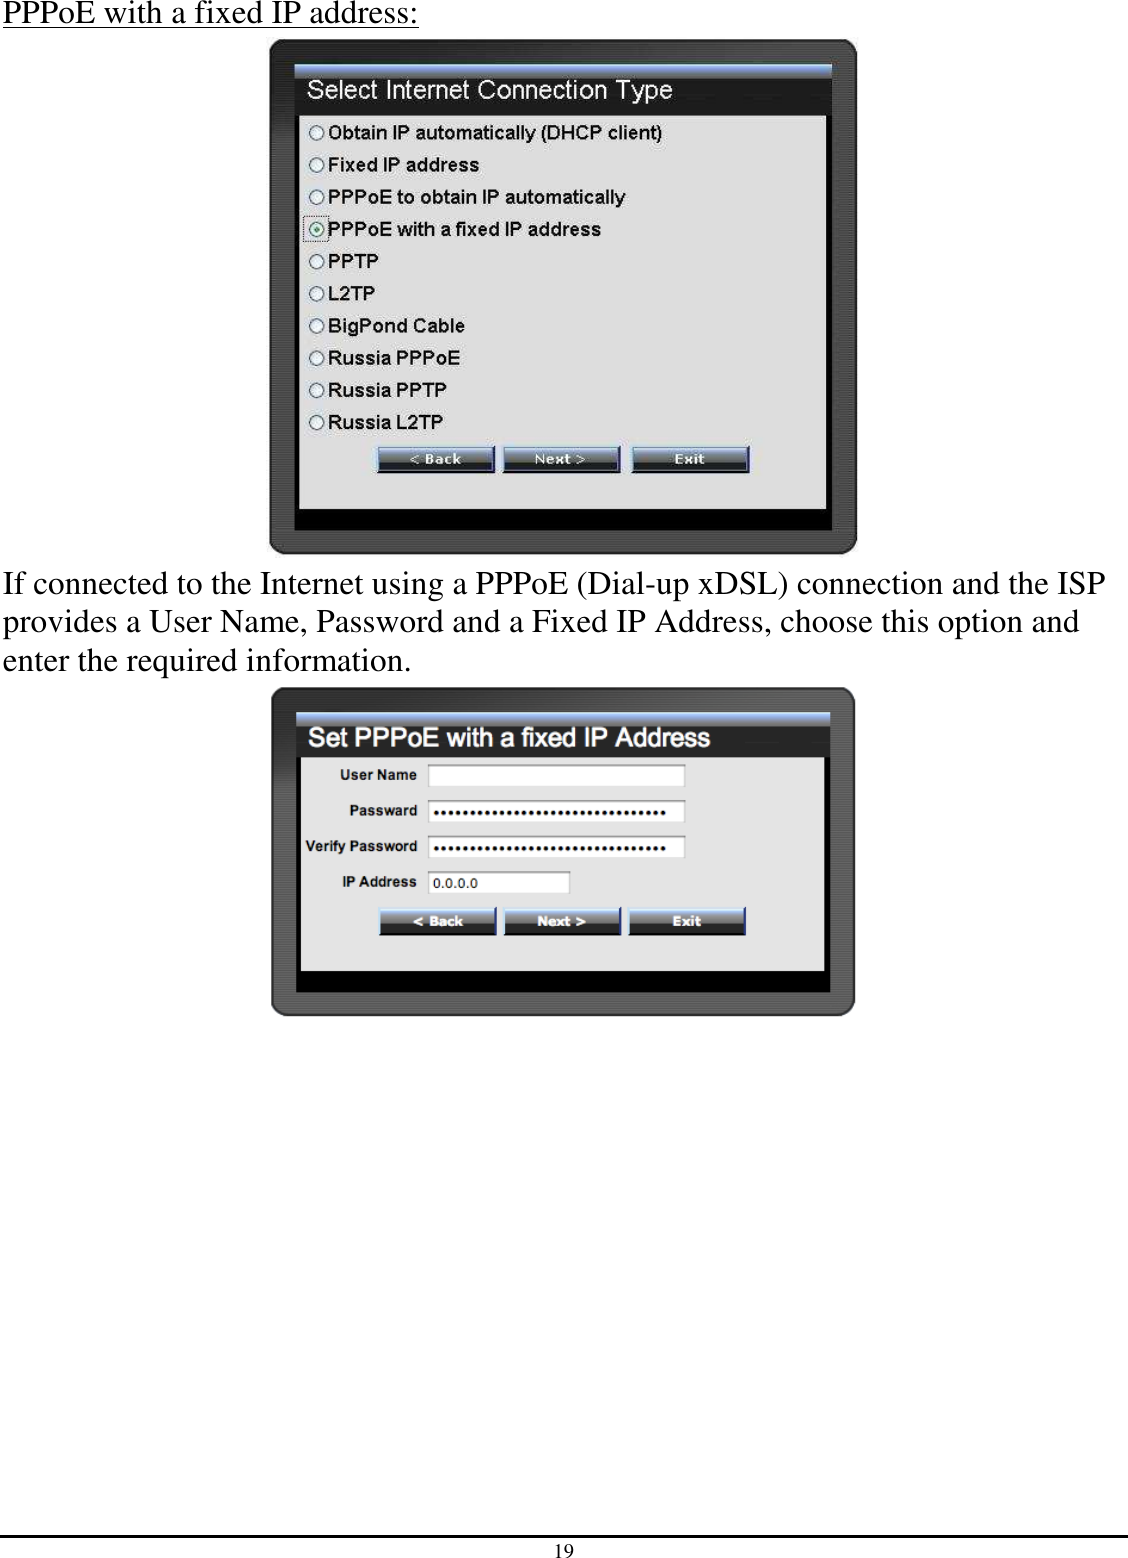 19 PPPoE with a fixed IP address:  If connected to the Internet using a PPPoE (Dial-up xDSL) connection and the ISP provides a User Name, Password and a Fixed IP Address, choose this option and enter the required information.  